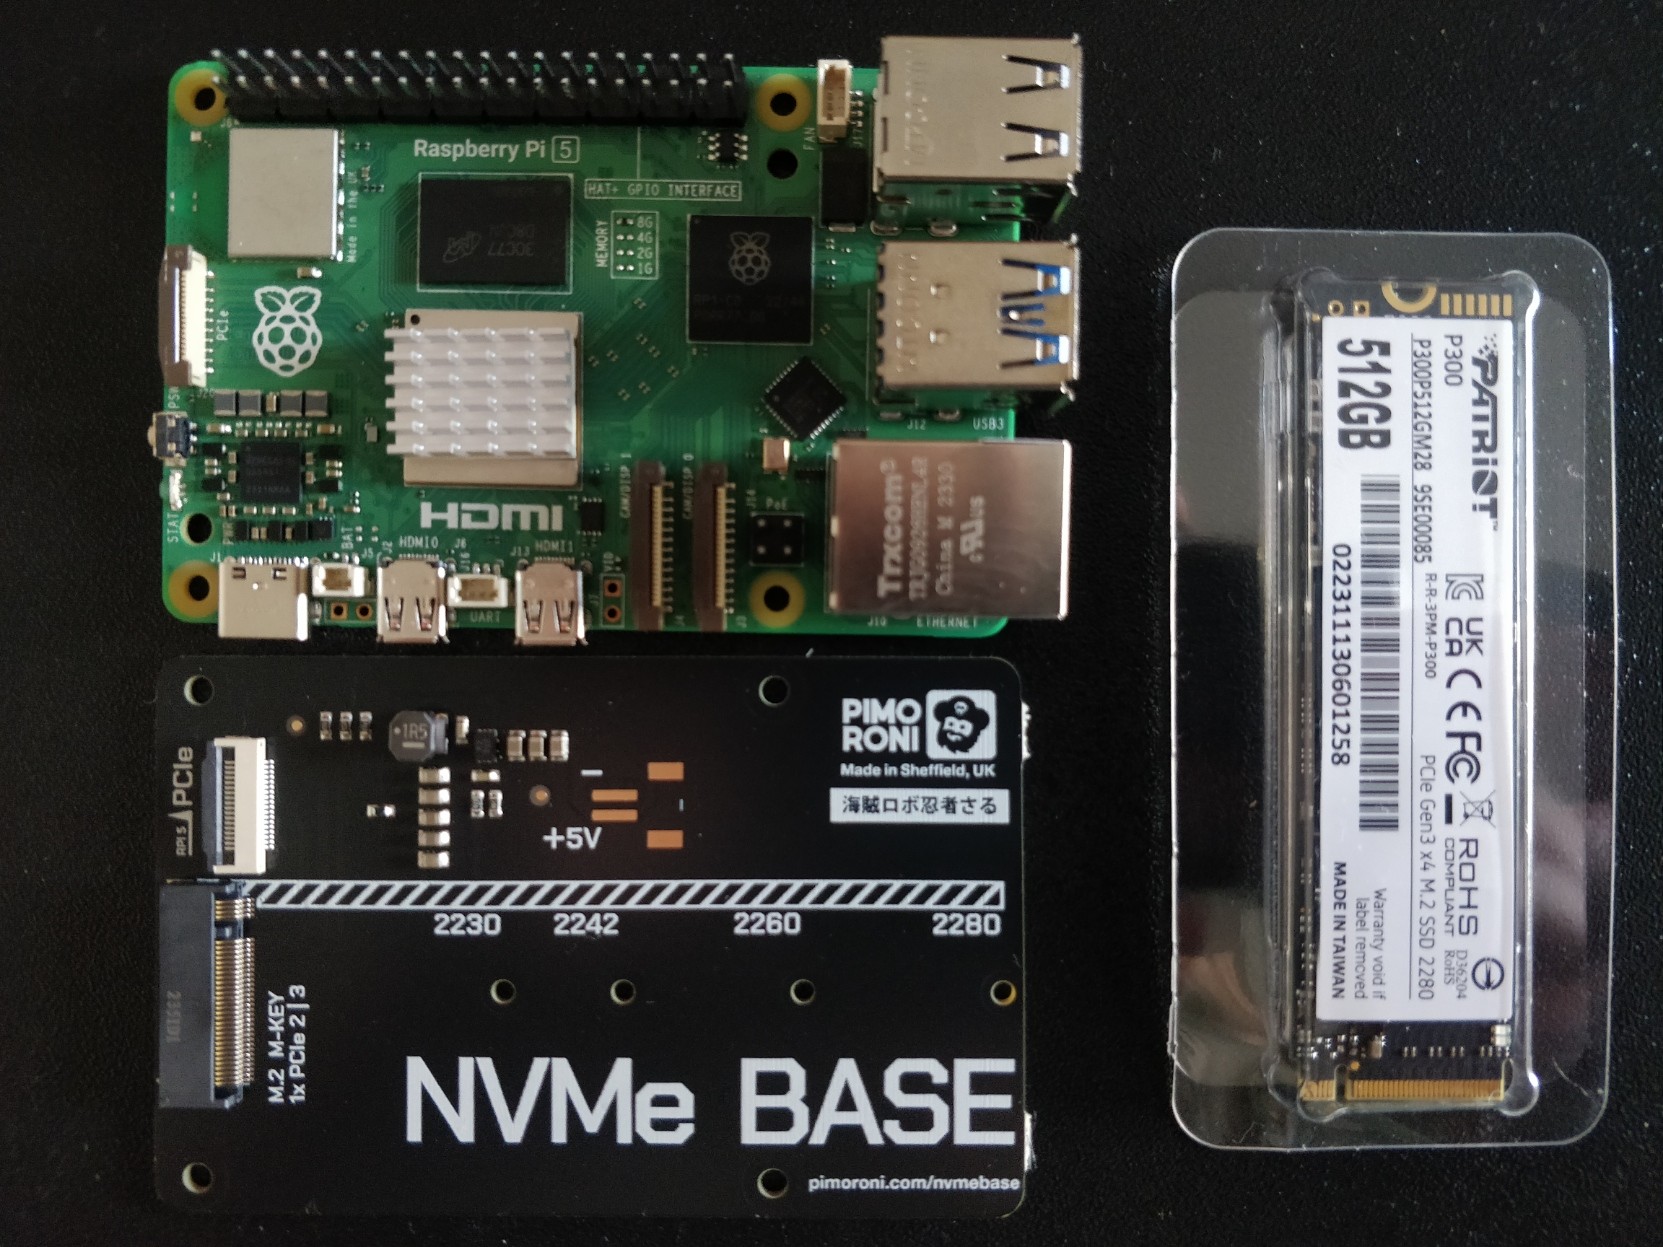 A photograph showing an arrangement of a Raspberry Pi 5, Pimoroni NVMe base and a 500GB NVMe solid state drive.